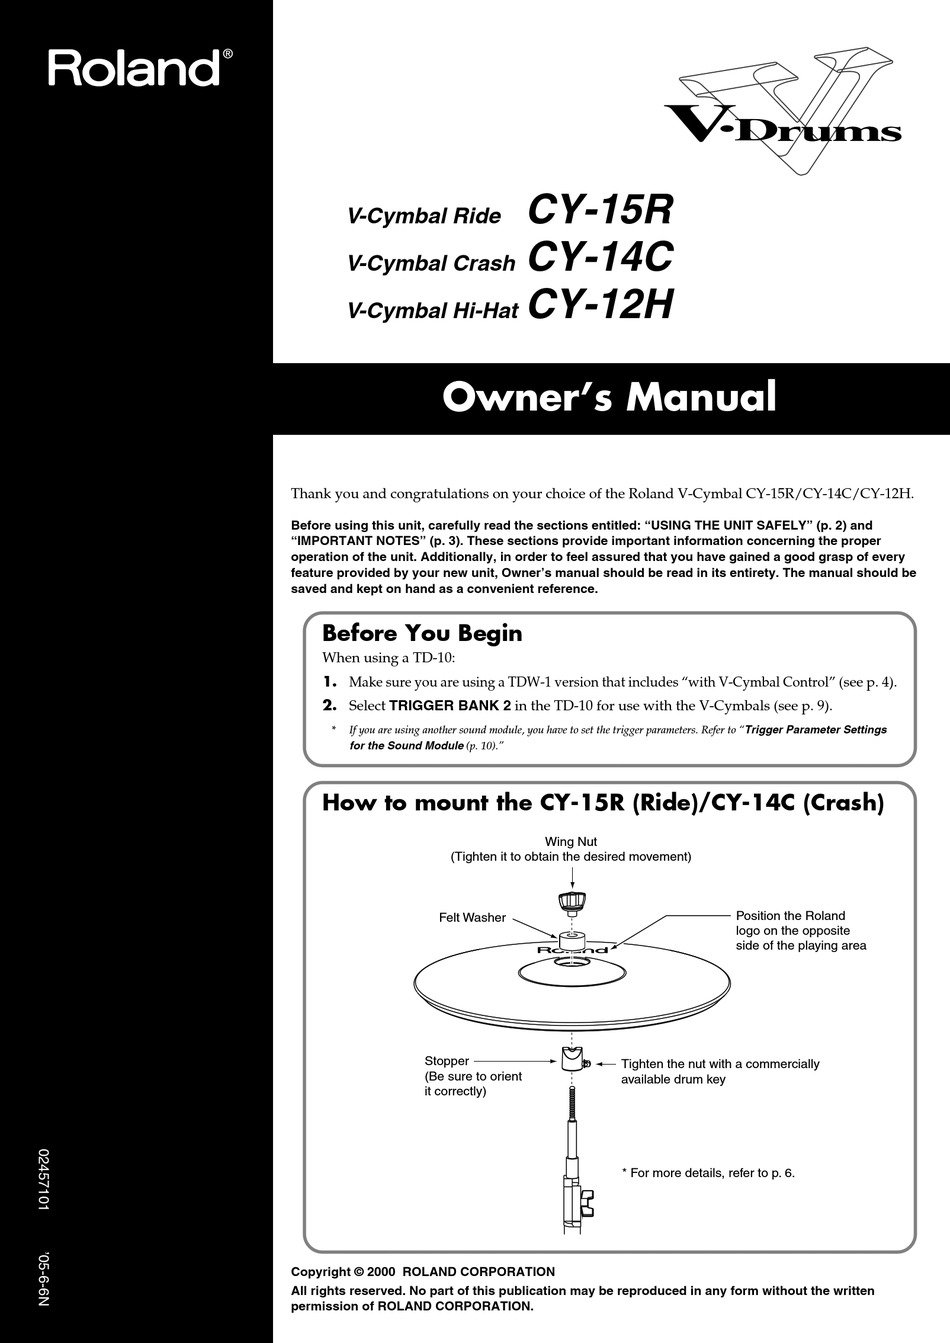 ROLAND V-CYMBAL RIDE CY-15R OWNER'S MANUAL Pdf Download | ManualsLib